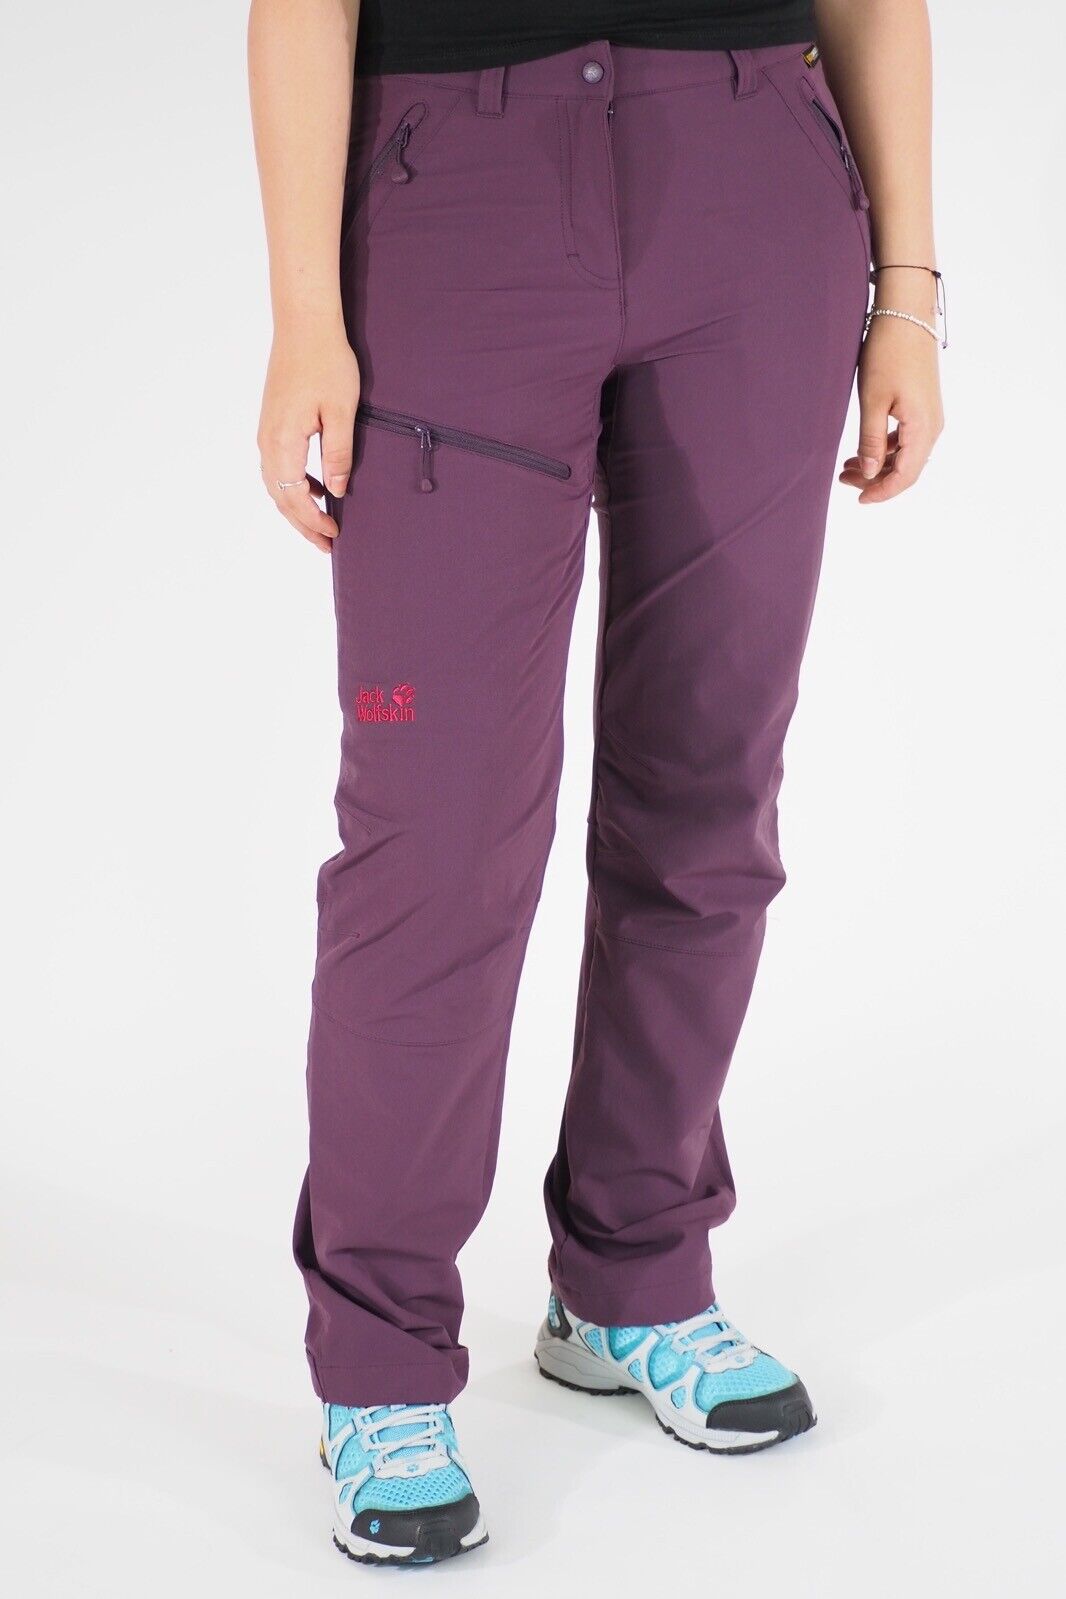 Womens Jack Wolfskin Activate 1501481 Grapevine Warm Windproof Hiking Trousers